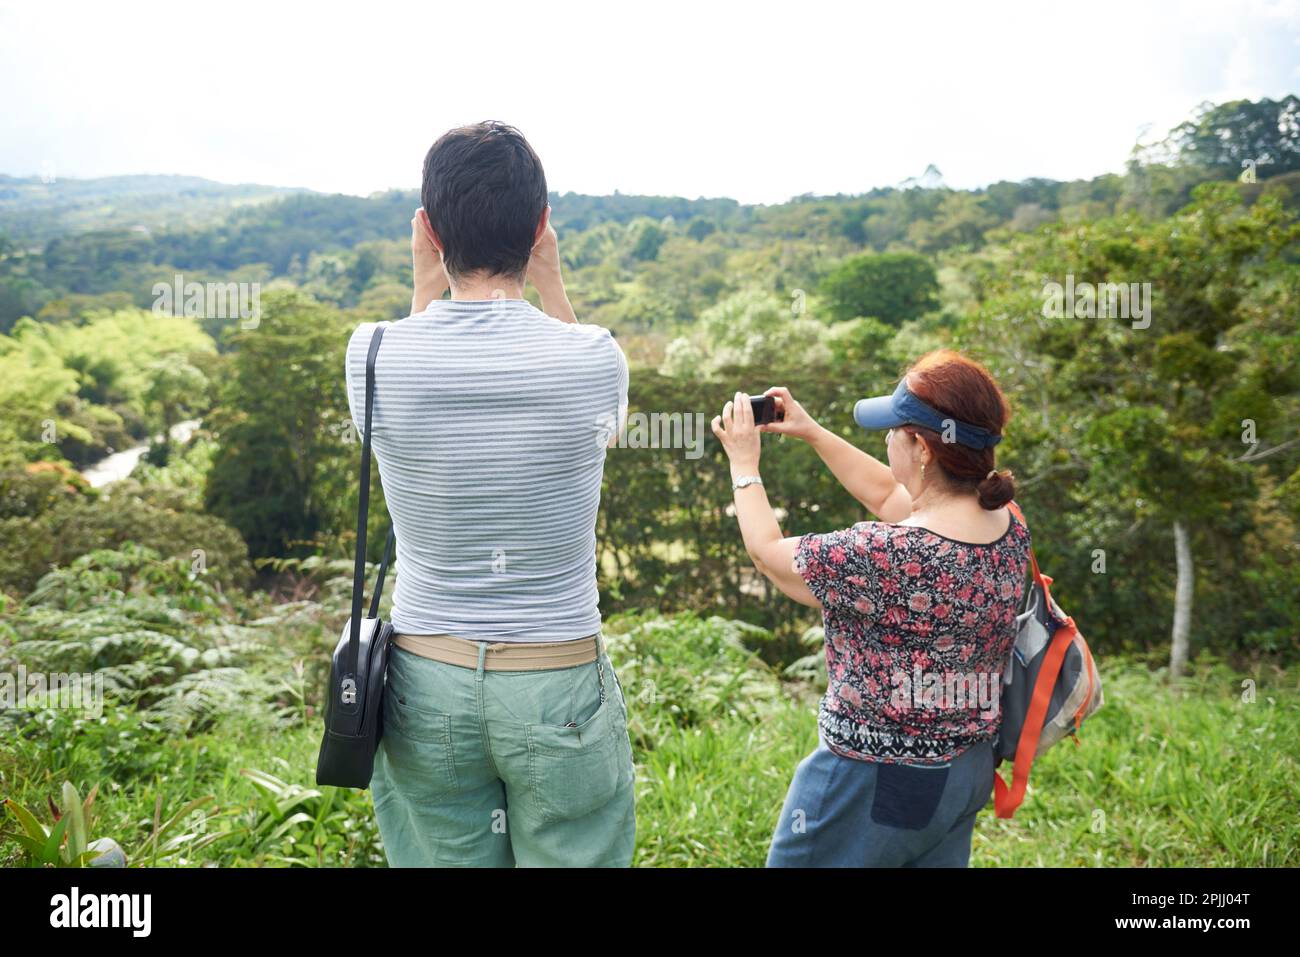 Mother with her adult son enjoying a trip, he looks at the landscape with binoculars while she takes pictures. Stock Photo